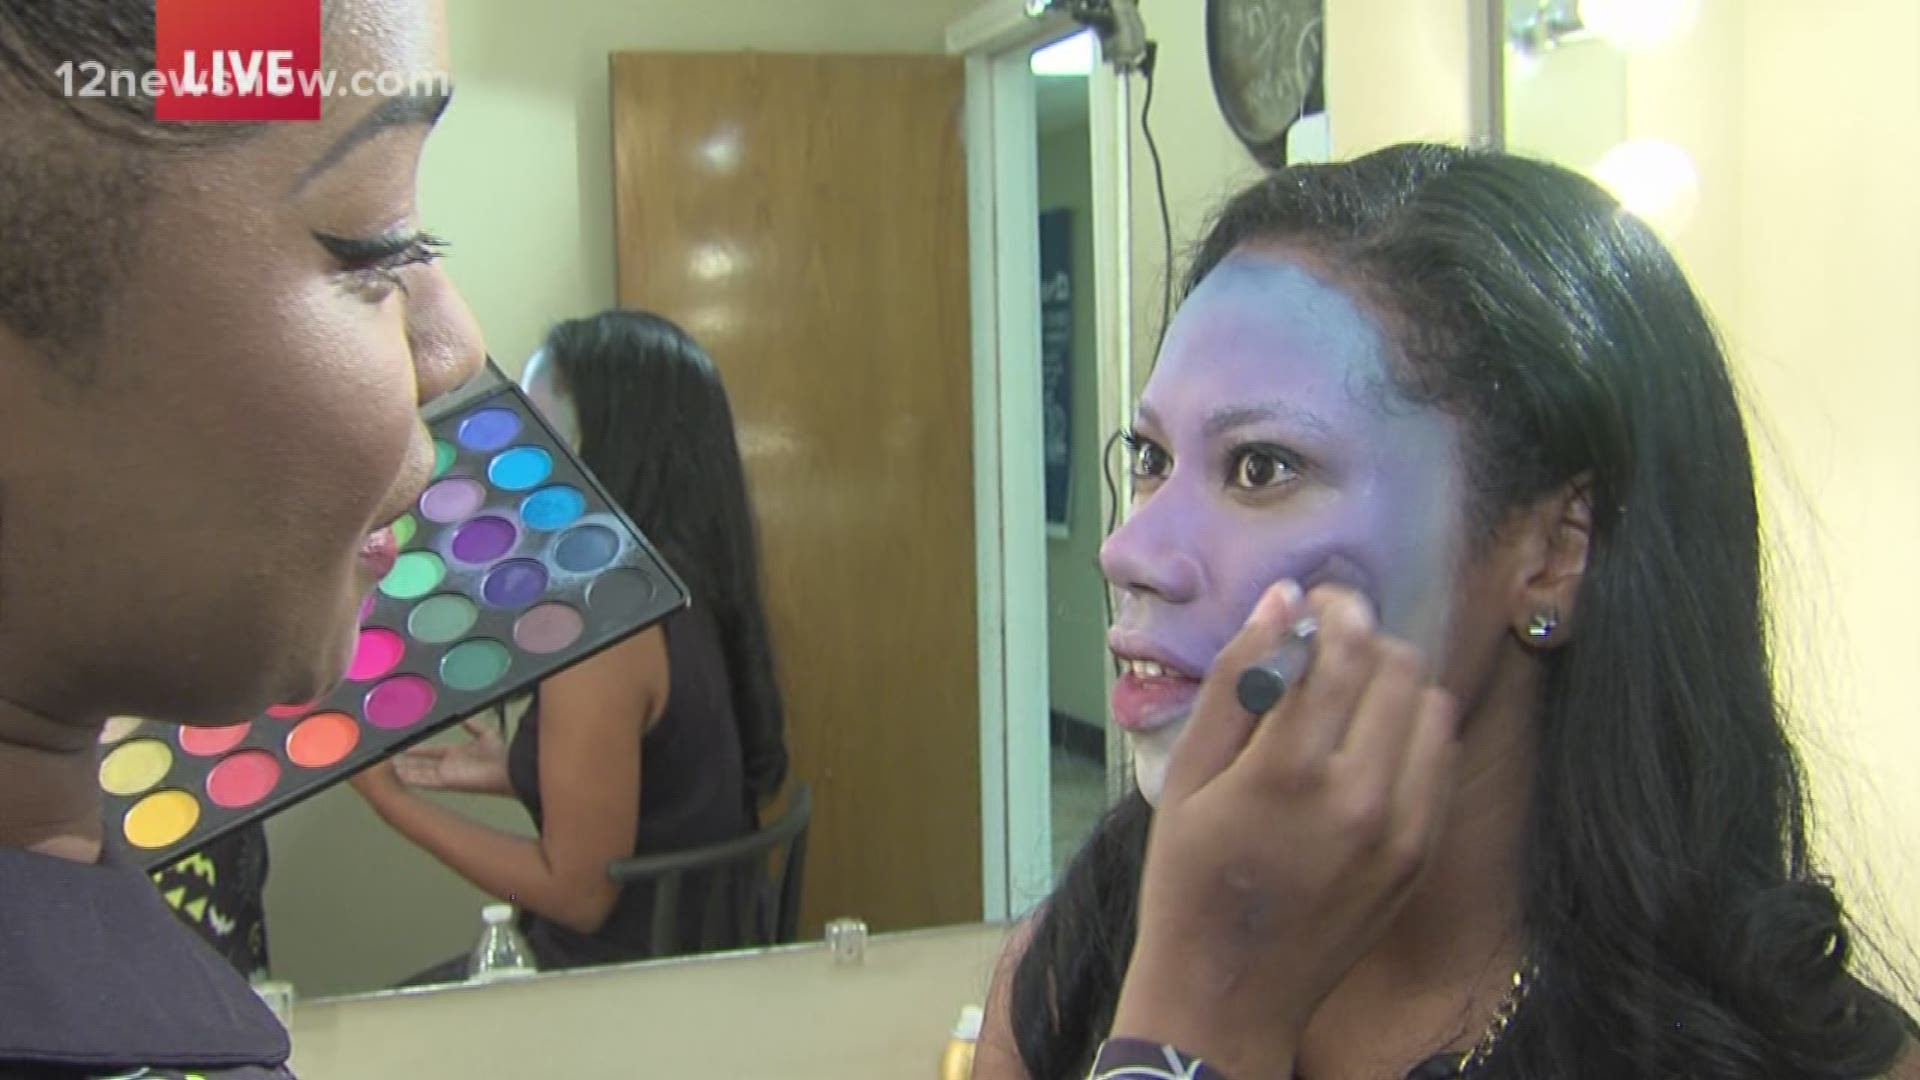 13 DAYS OF HALLOWEEN: Who needs a costume when you've got makeup?